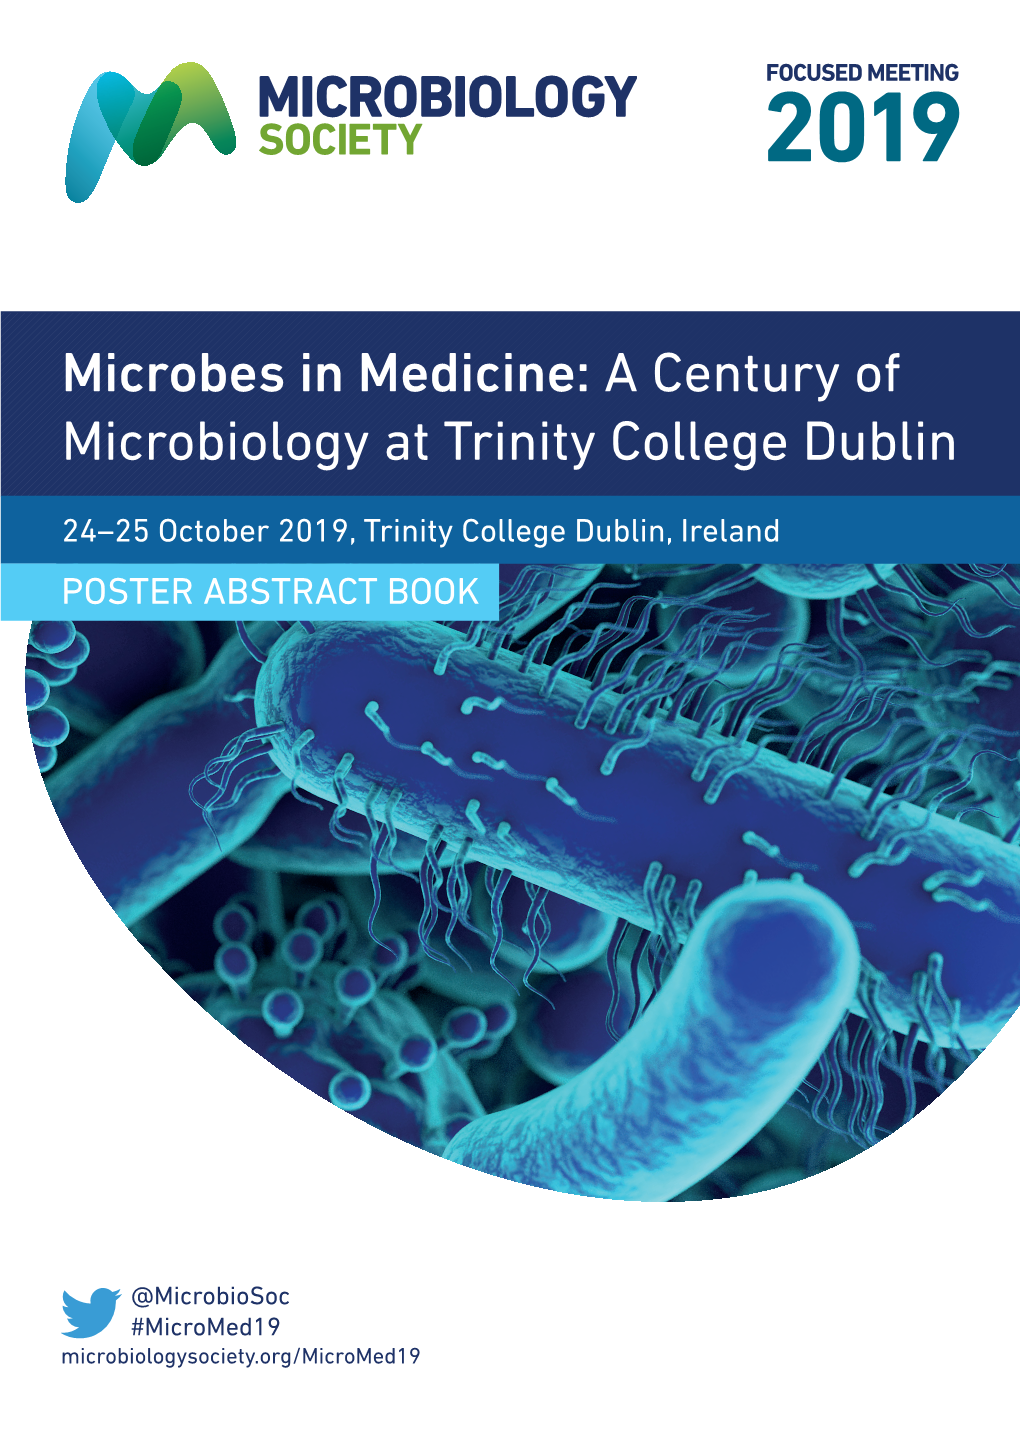 Microbes in Medicine: a Century of Microbiology at Trinity College Dublin